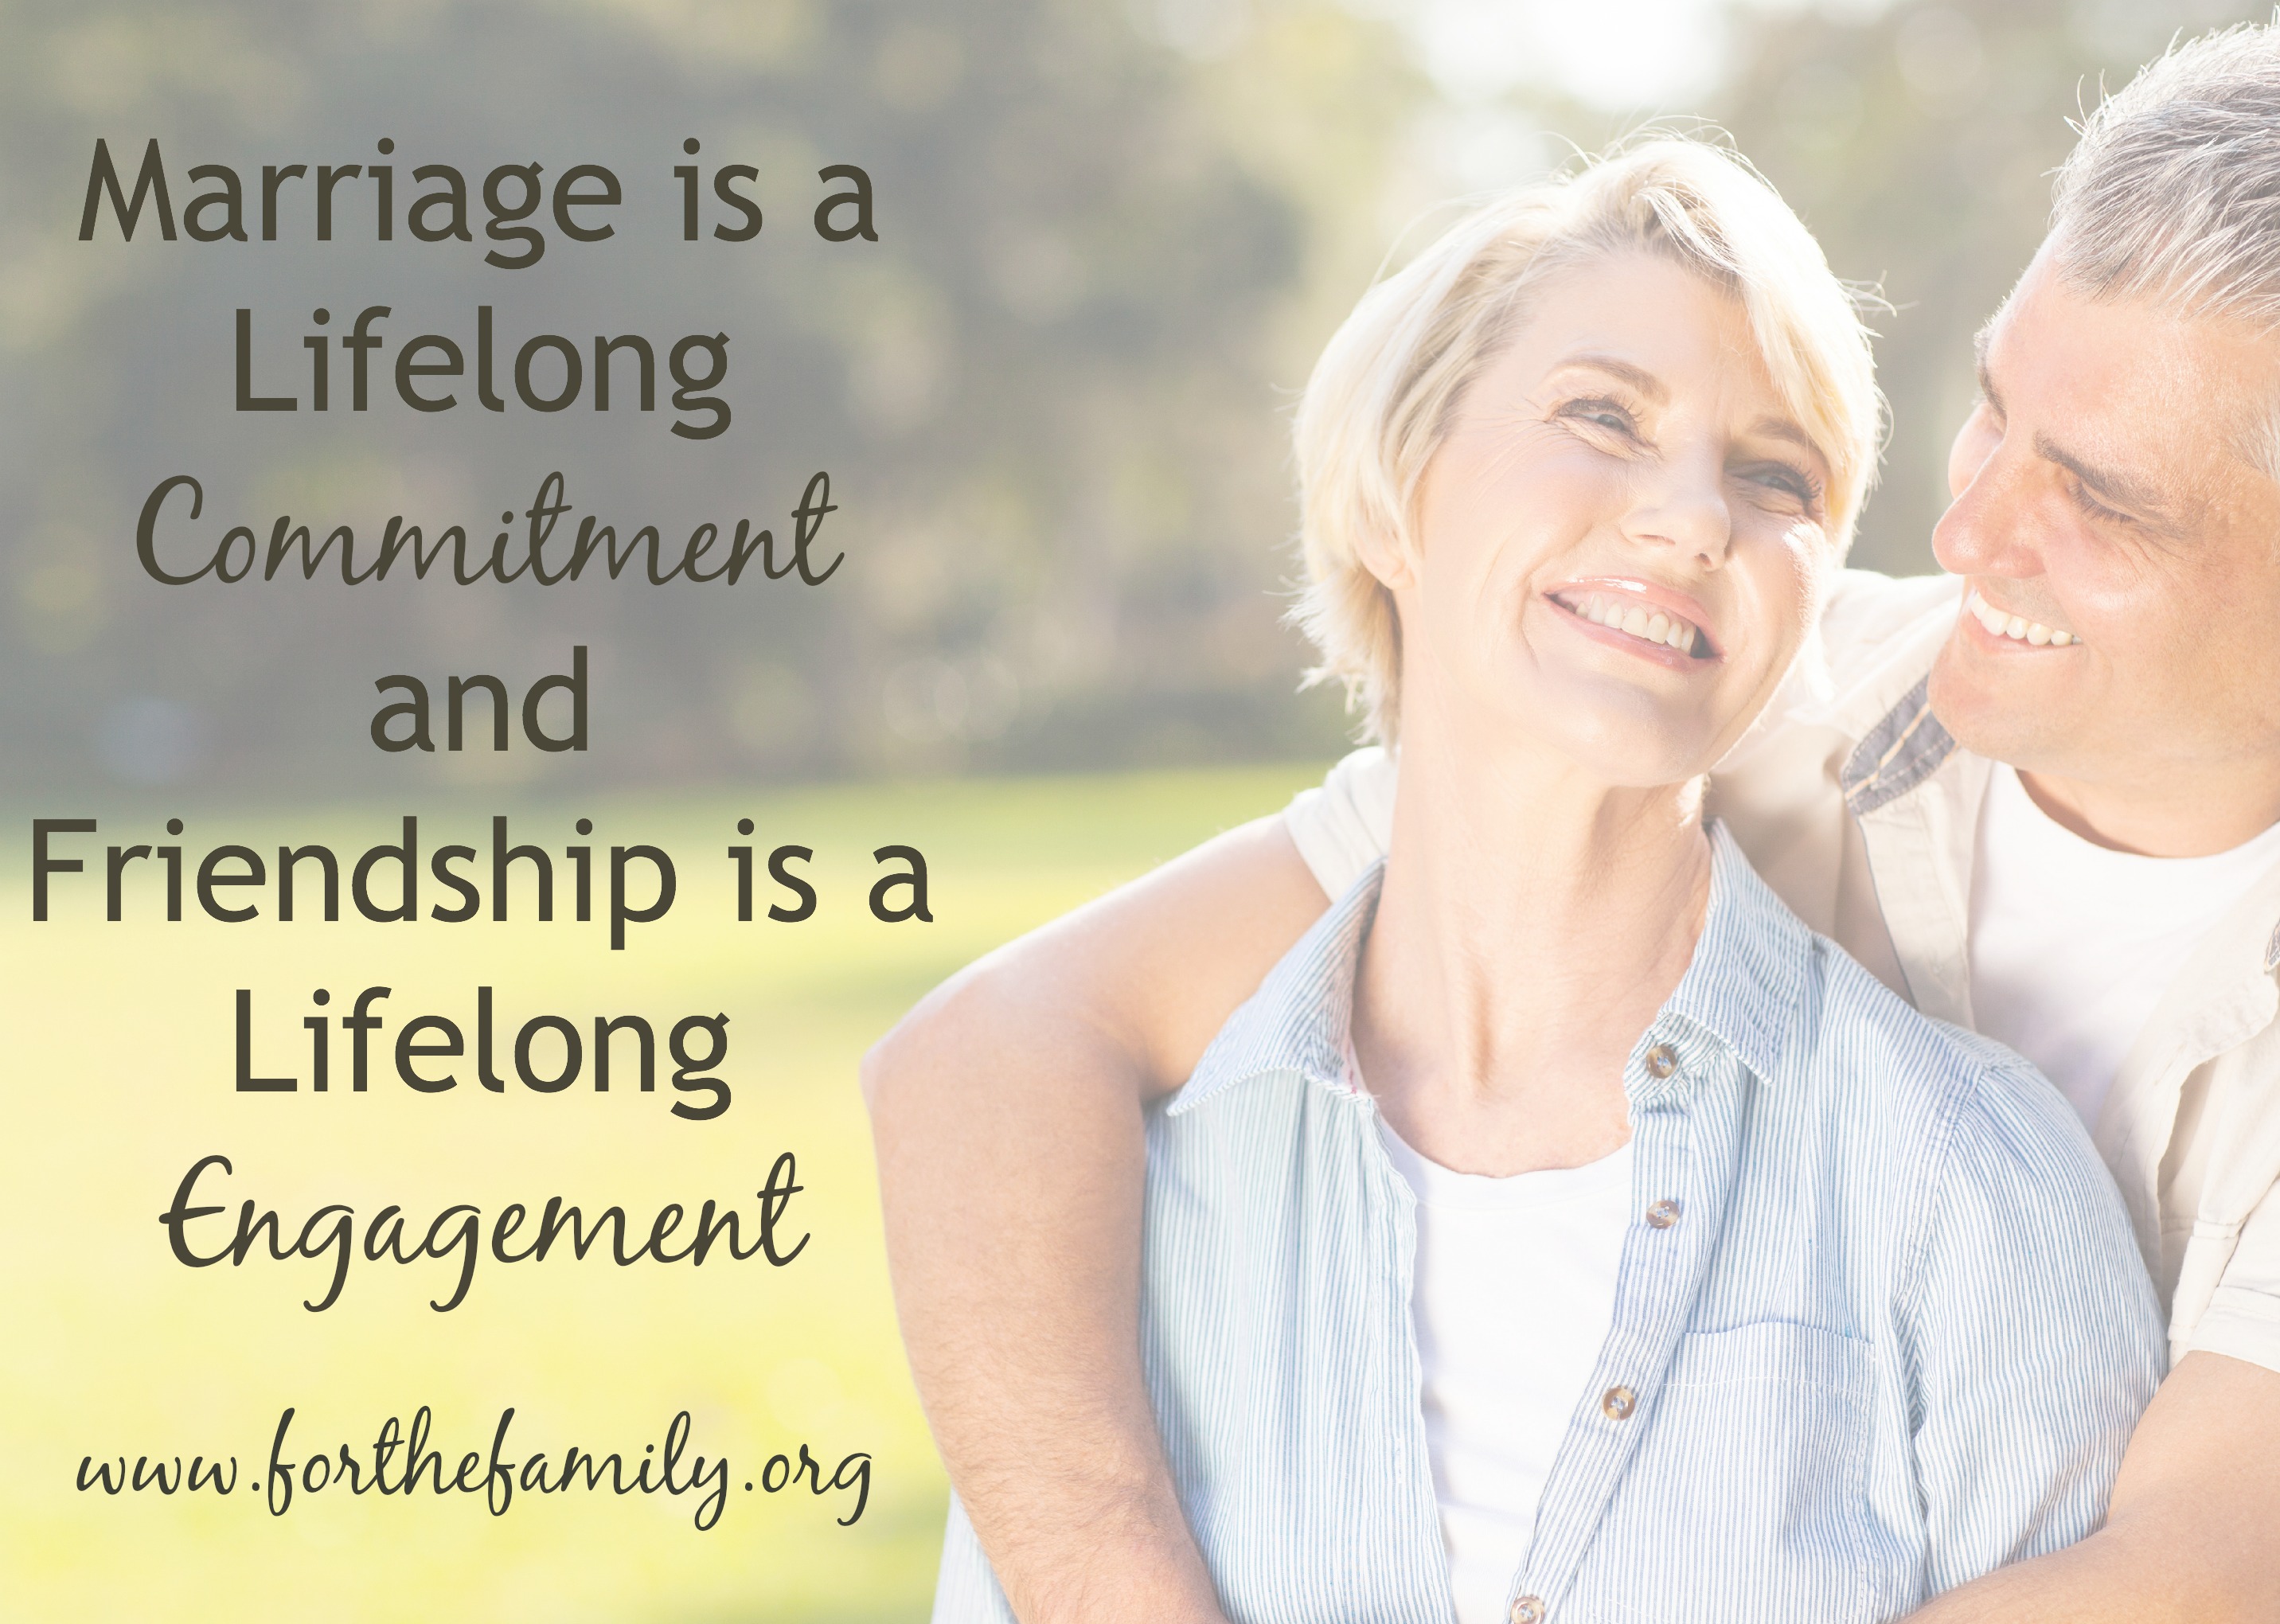 Marriage is a Lifelong Commitment, and Friendship is a Lifelong Engagement